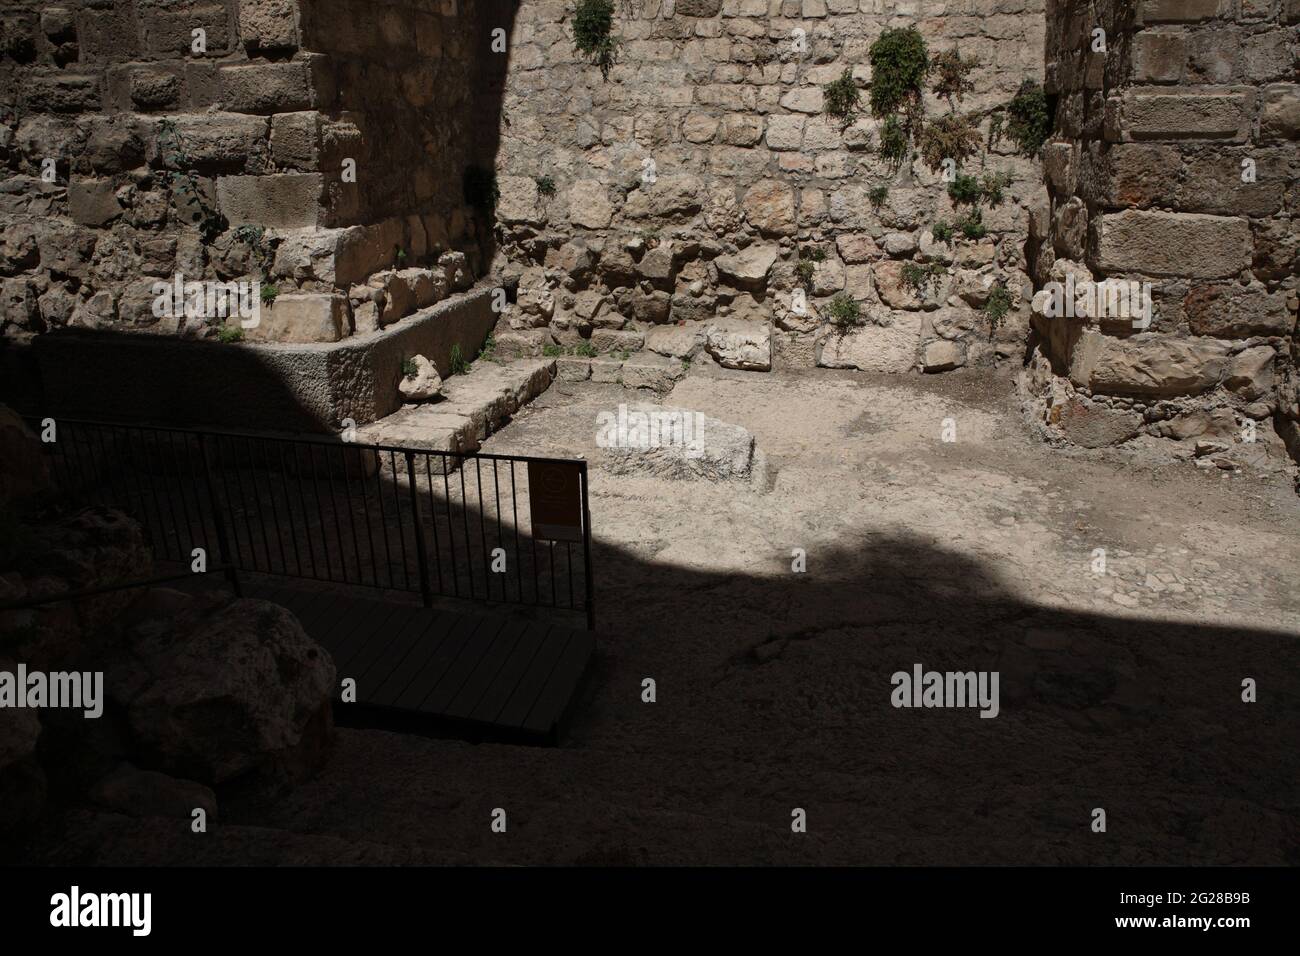 Ruins of Koi Ponds in the Tower of David or David's Citadel area , built by Hasmonean in 1st century BC, later were part of Herod the Great's Palace. Stock Photo